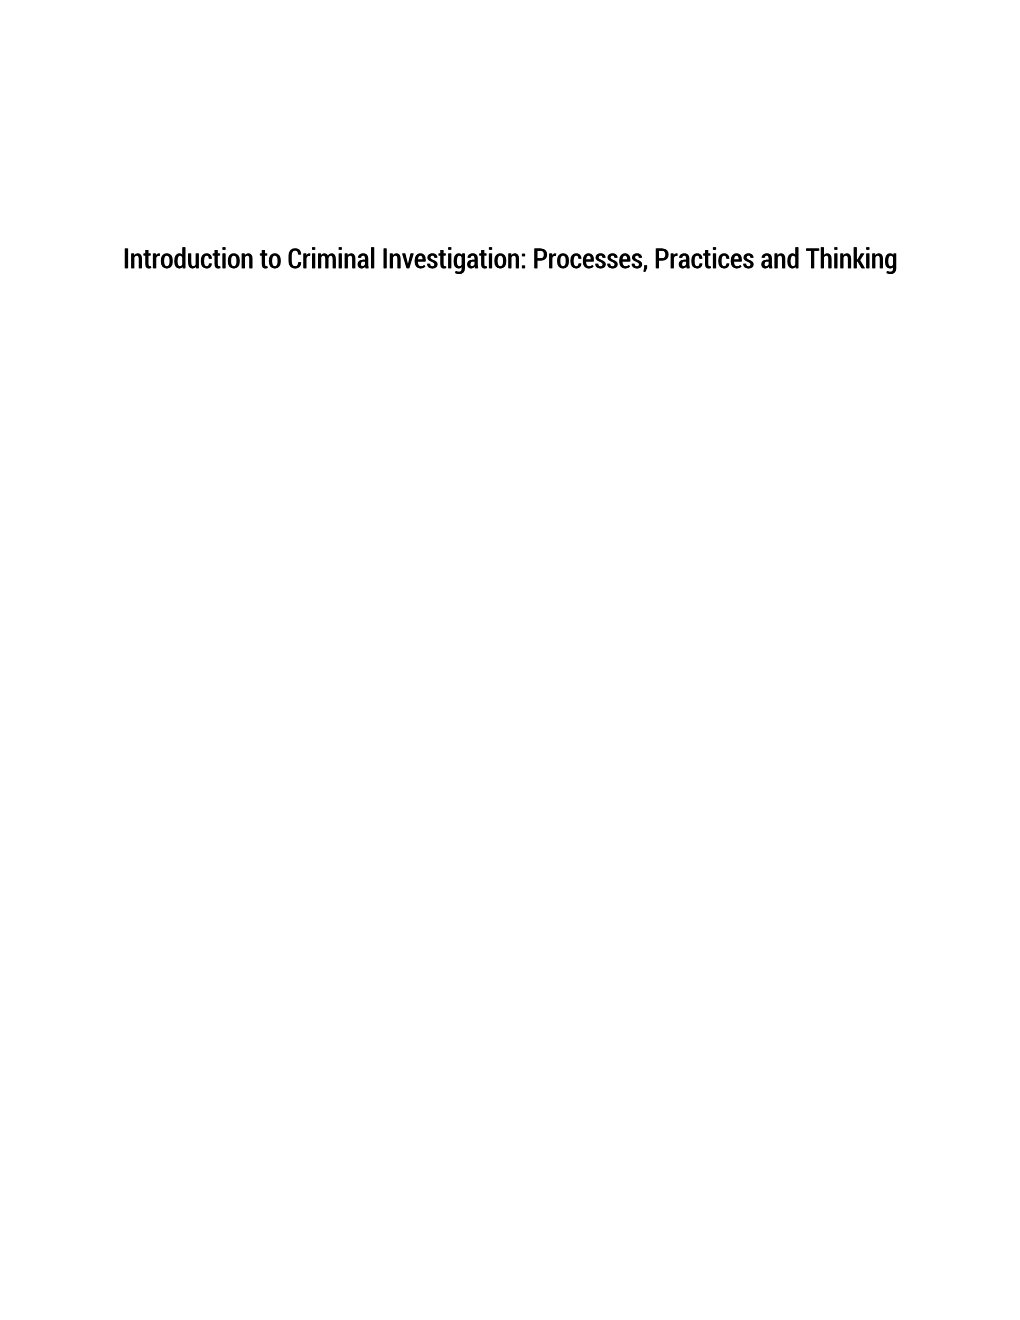 Introduction to Criminal Investigation: Processes, Practices and Thinking Introduction to Criminal Investigation: Processes, Practices and Thinking